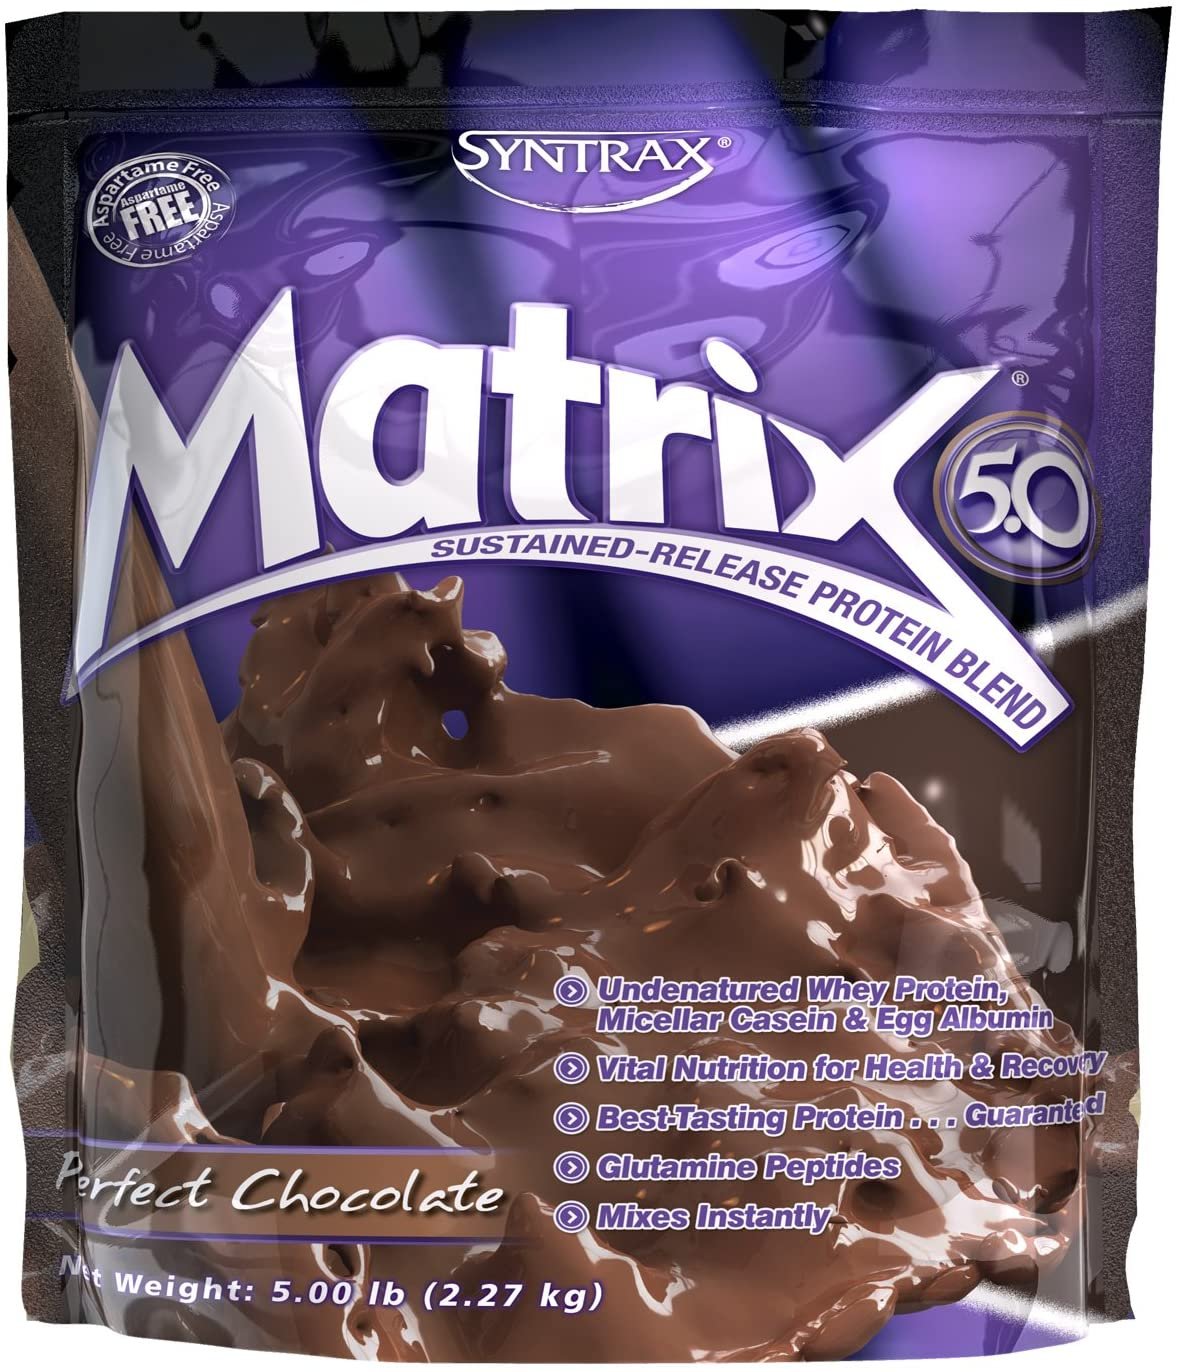 Cookies and Cream Syntrax Matrix 5.0 Protein Powders Ultrafiltered Whey Protein 5LB